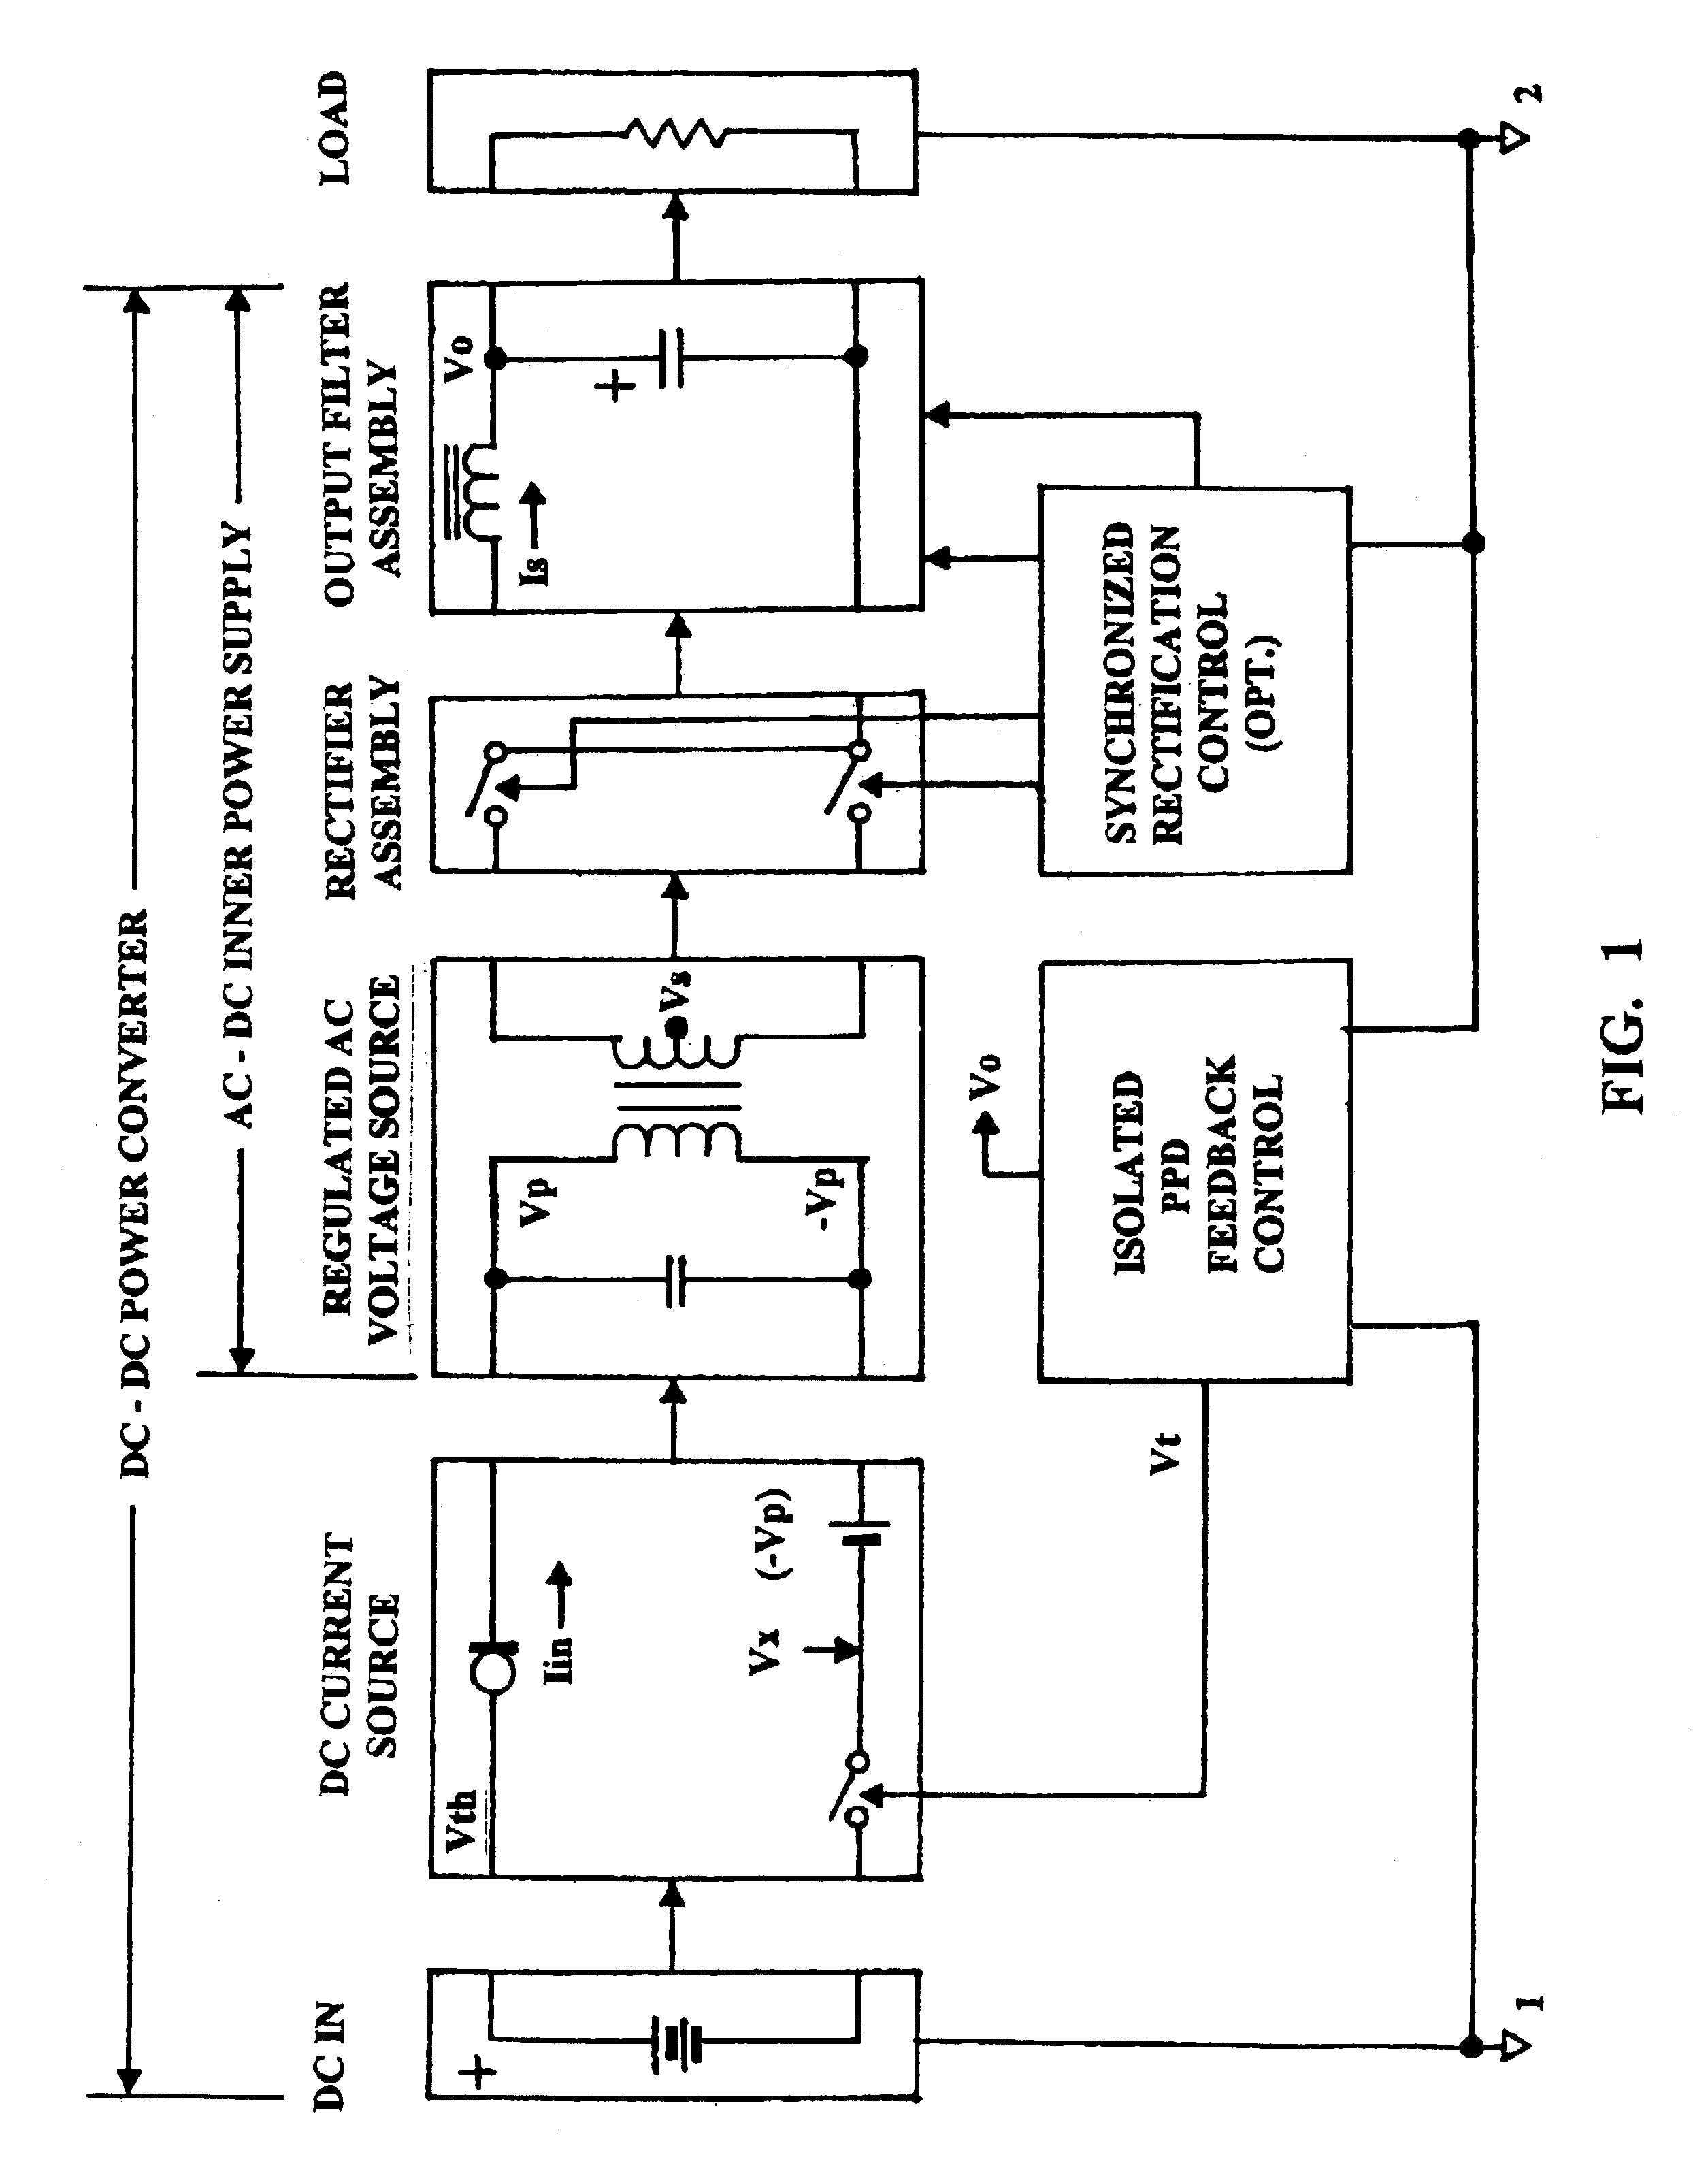 Power converter with input-side resonance and pulse-position demodulation feedback control